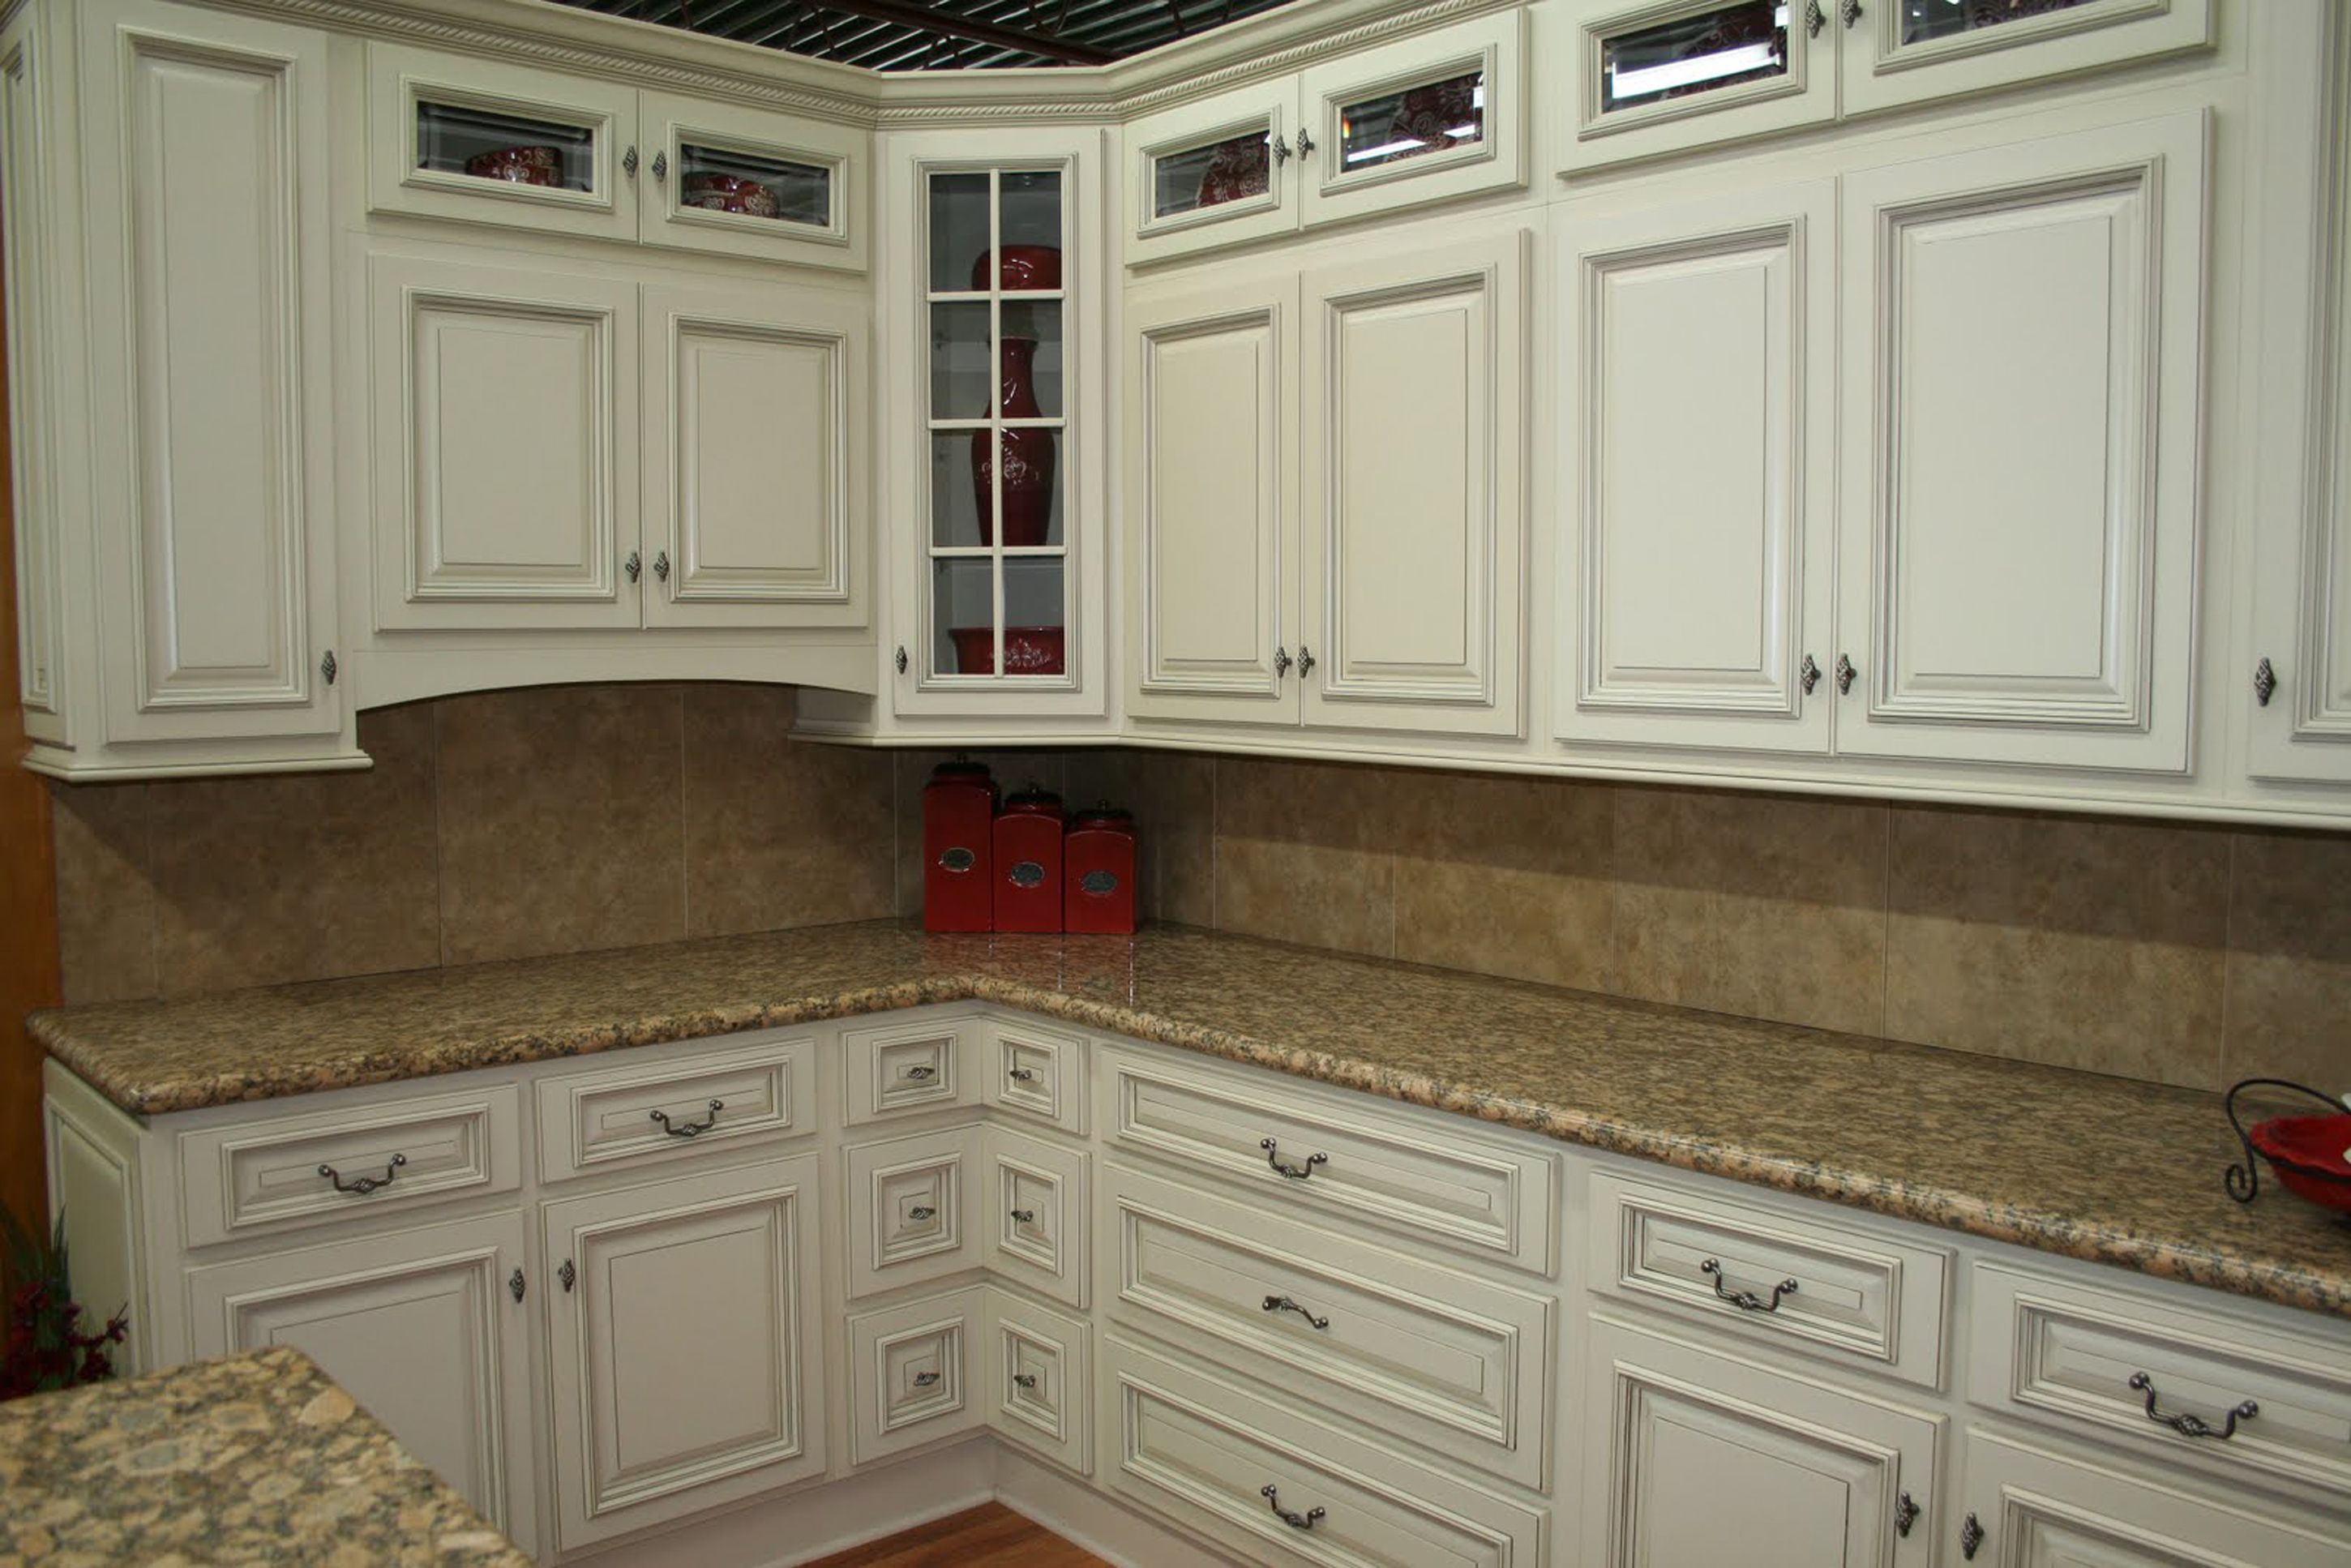 Luxury Classic White Kitchen Cabinet Design With Brown Countertop And Brown Back Plash Exciting White Kitchen Cabinet Designs (View 40 of 123)